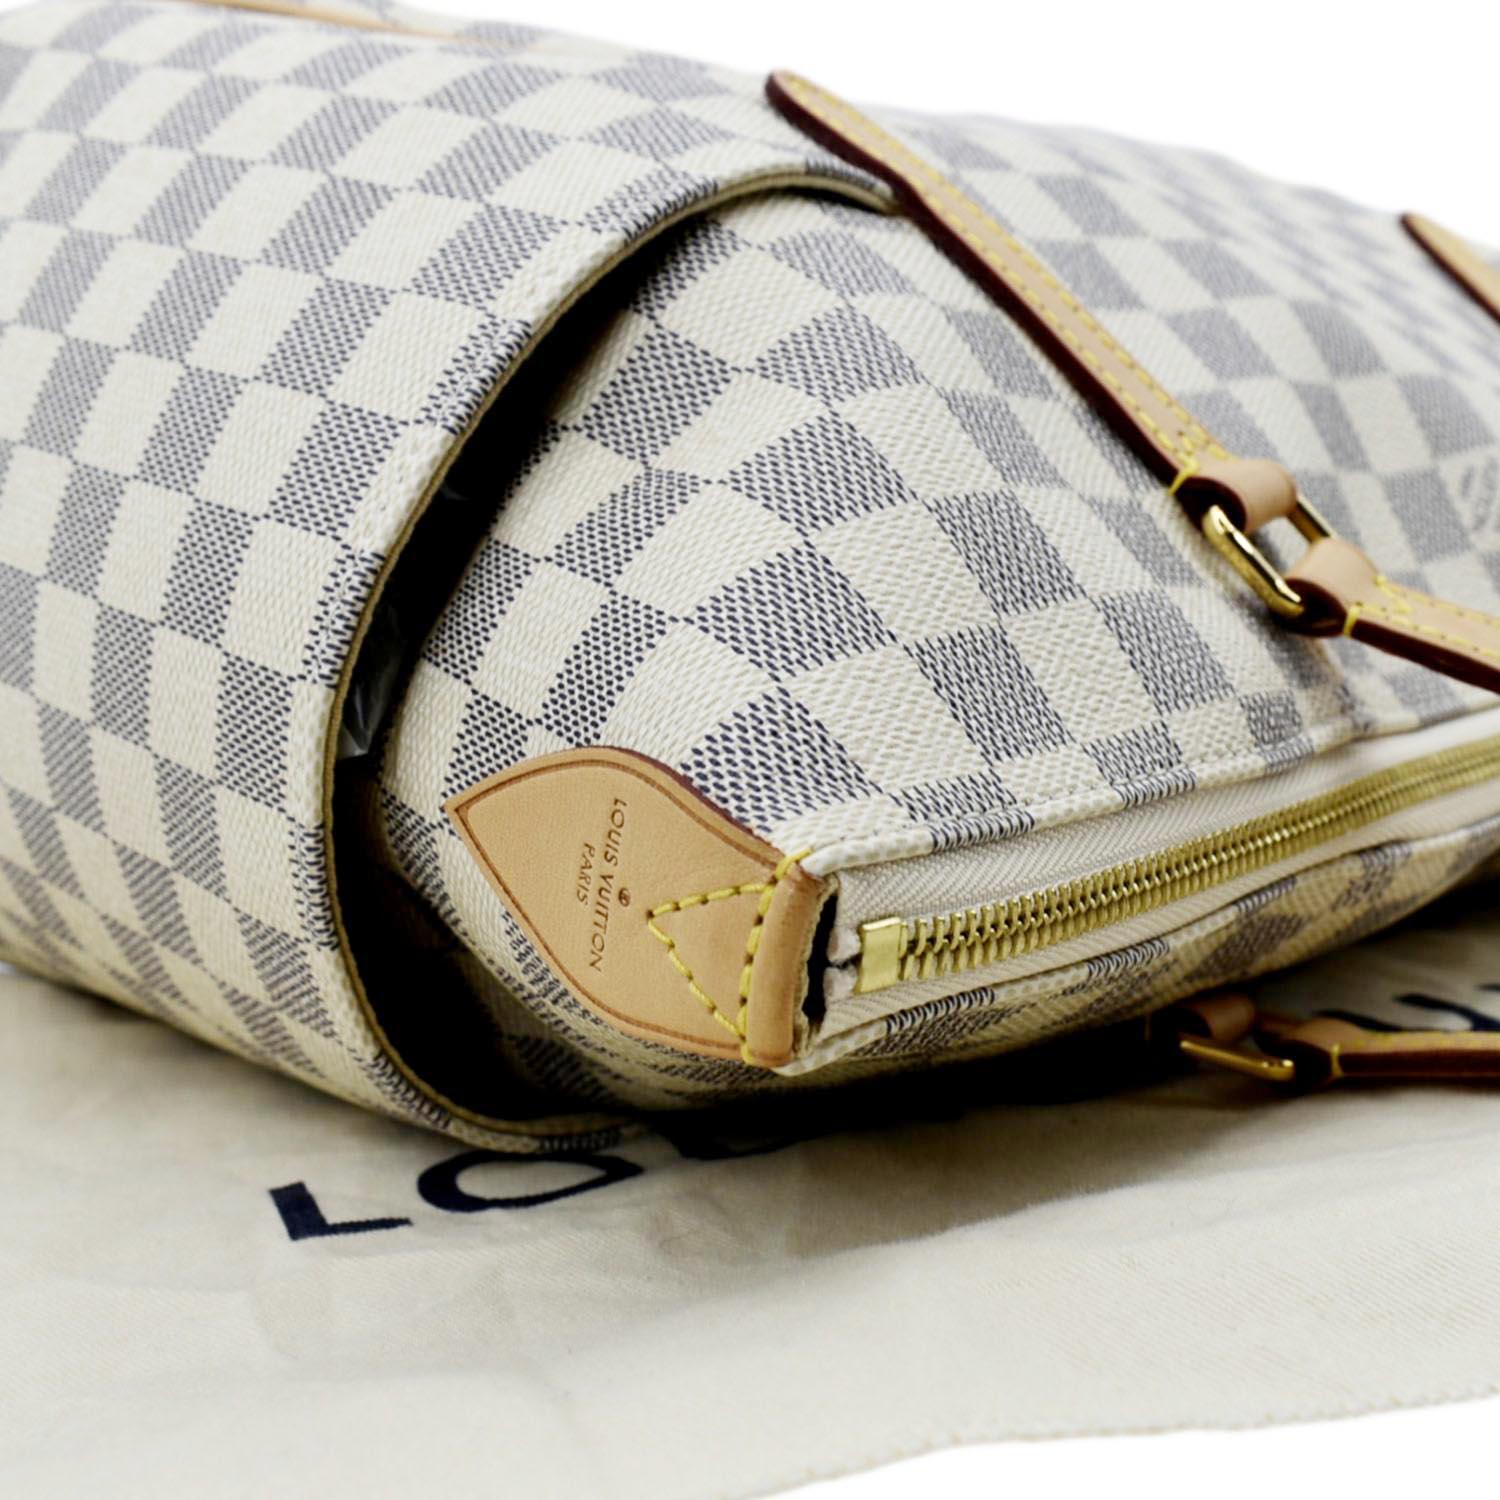 damier totally mm louis